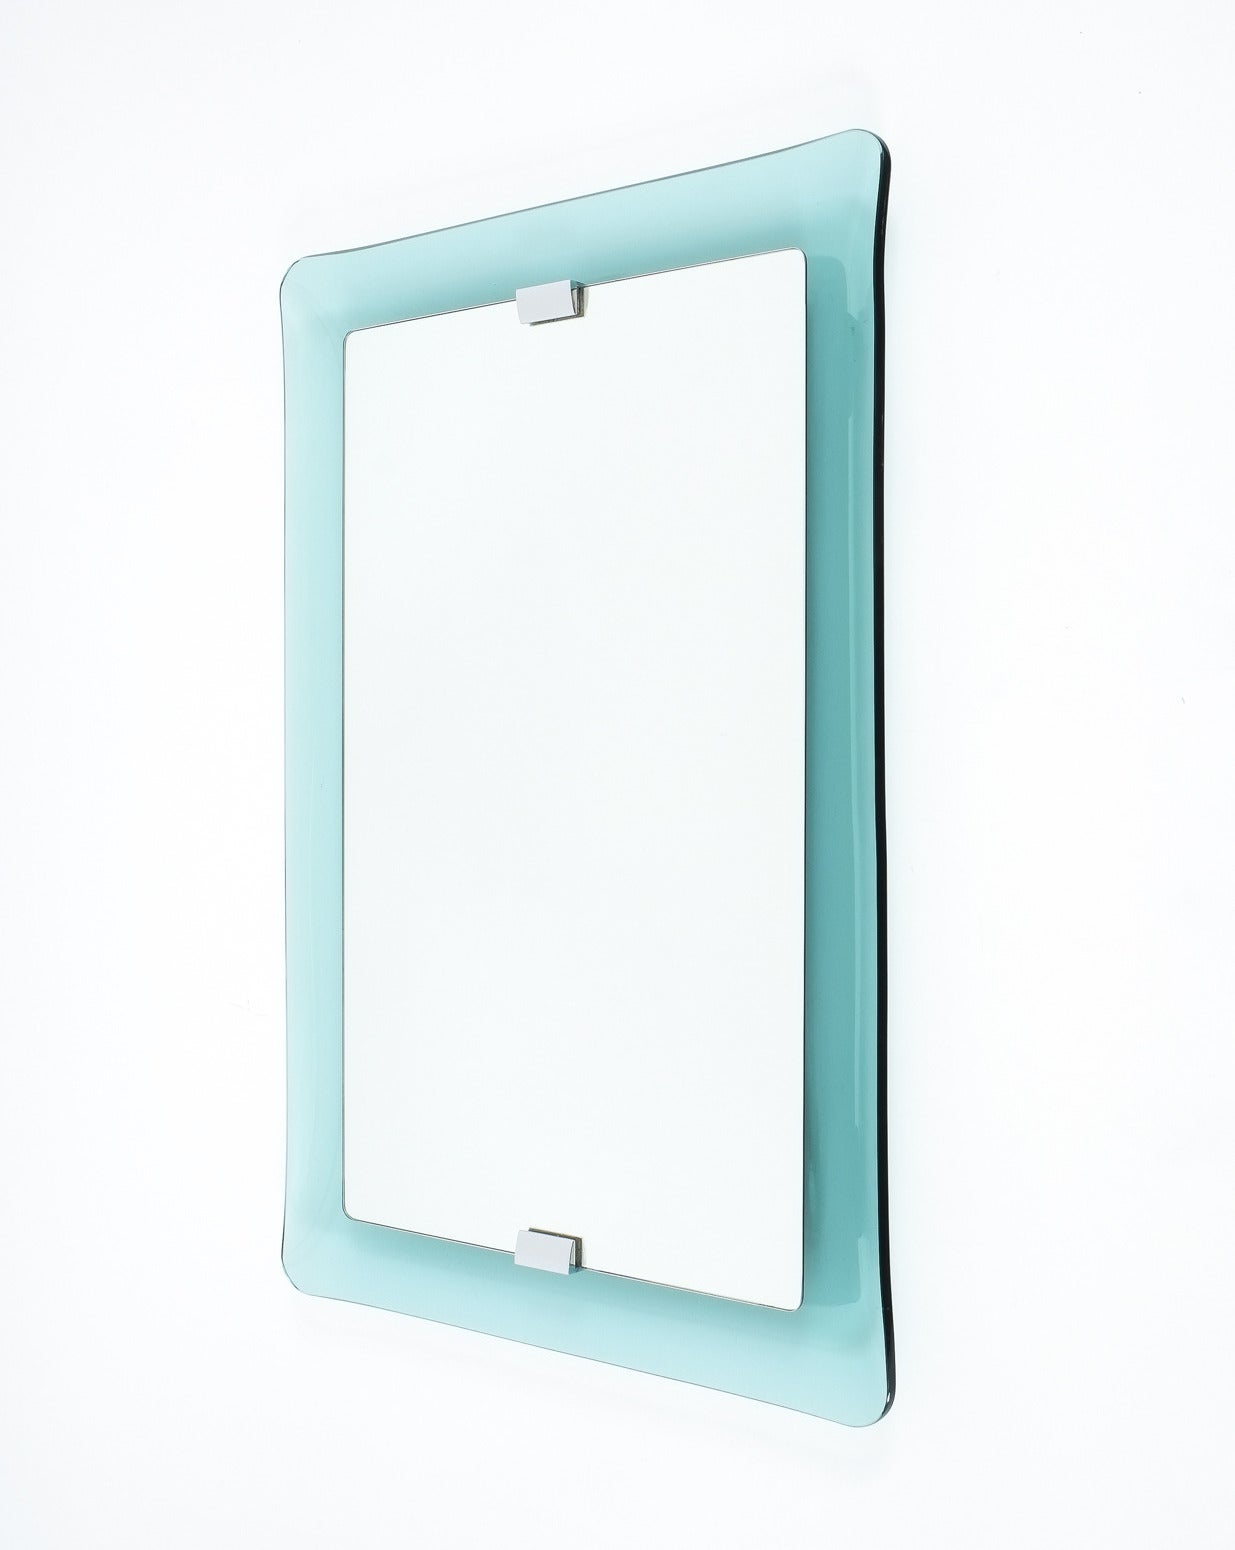 Large curved glass floating mirror by crystal Arte Glass circa 1950.

Beautiful crystal Arte mirror (Manufacturer, Italy) featuring a rectangular mirror floating over a delicately curved blue-greenish or turquoise thick glass frame that is also